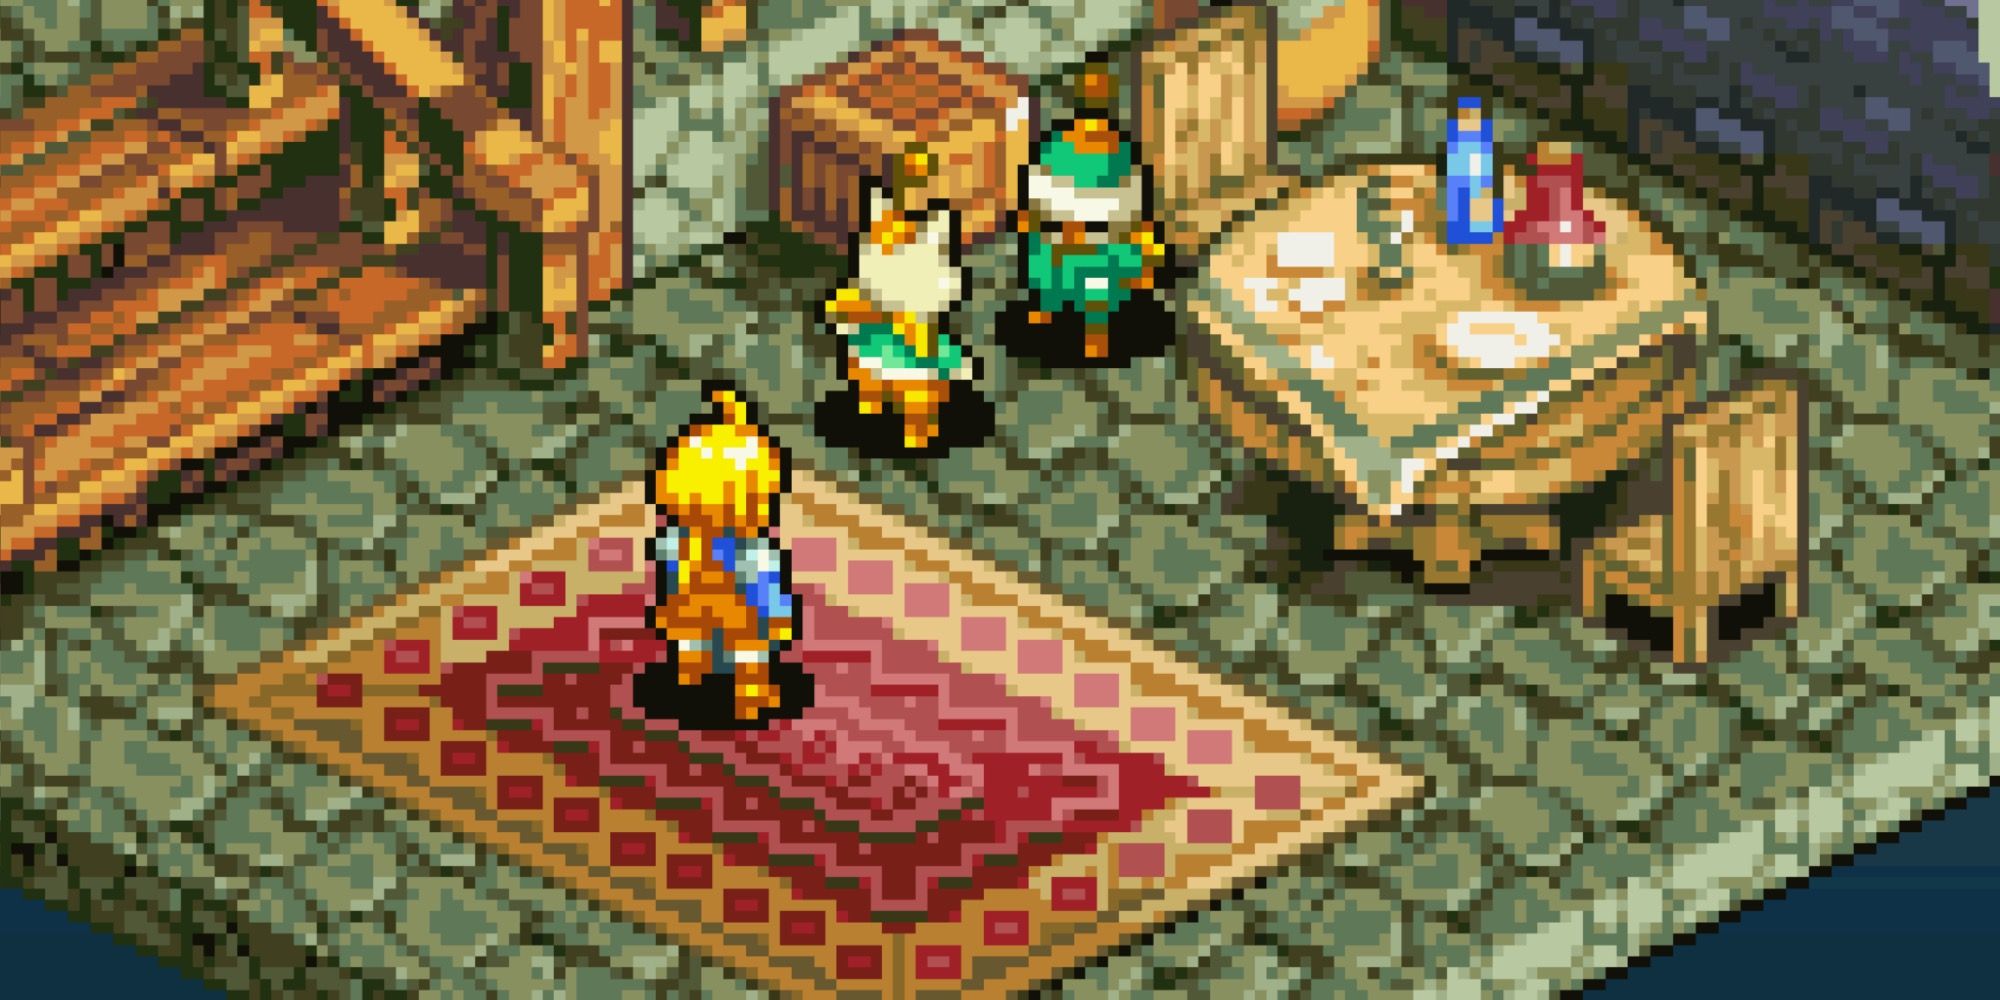 A cutscene featuring characters in Final Fantasy Tactics Advance